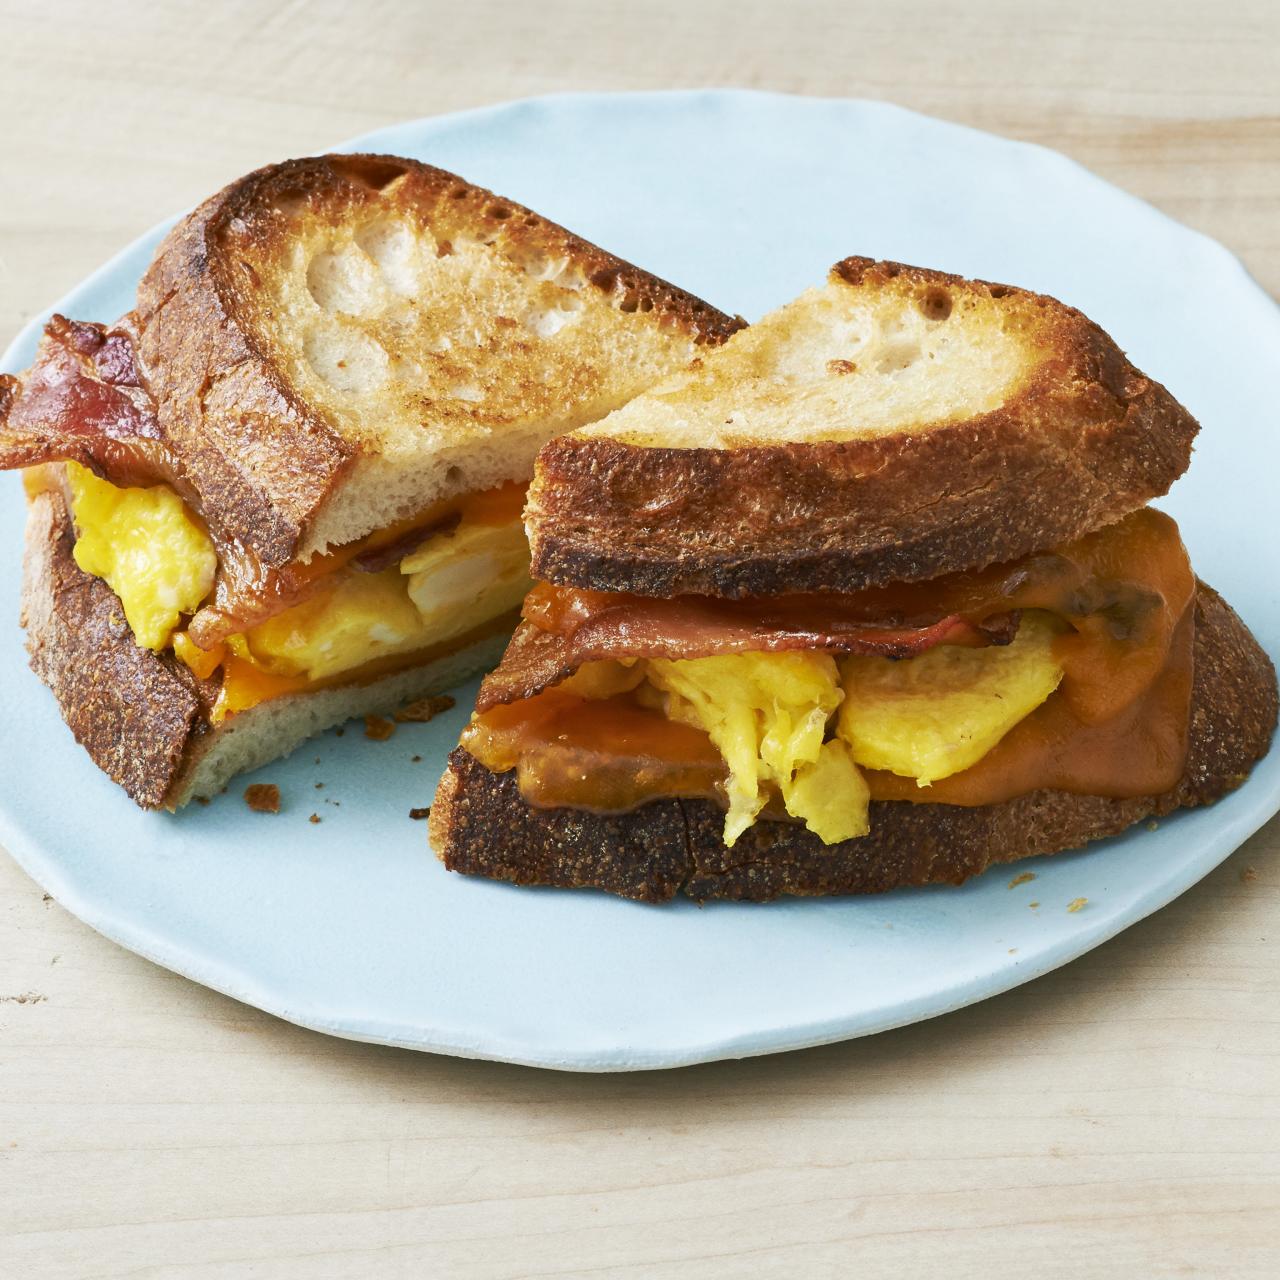 Grilled Bistro Breakfast Sandwiches Recipe: How to Make It